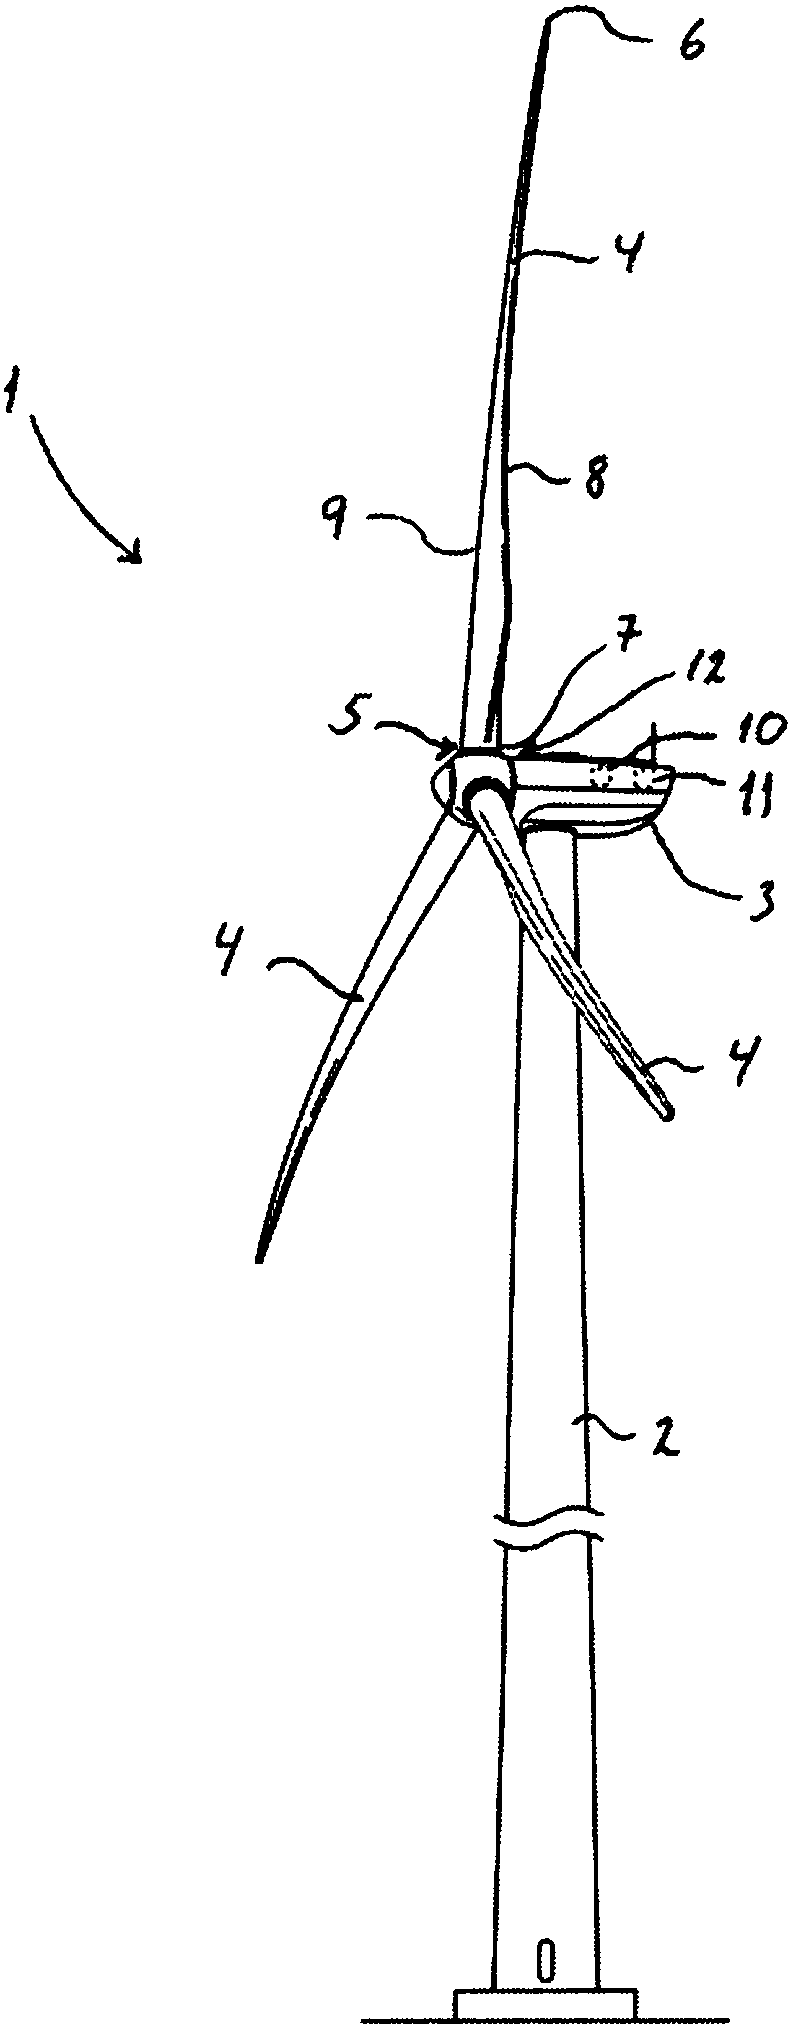 A wind turbine and a method of operating a wind turbine with a rotational speed exclusion zone